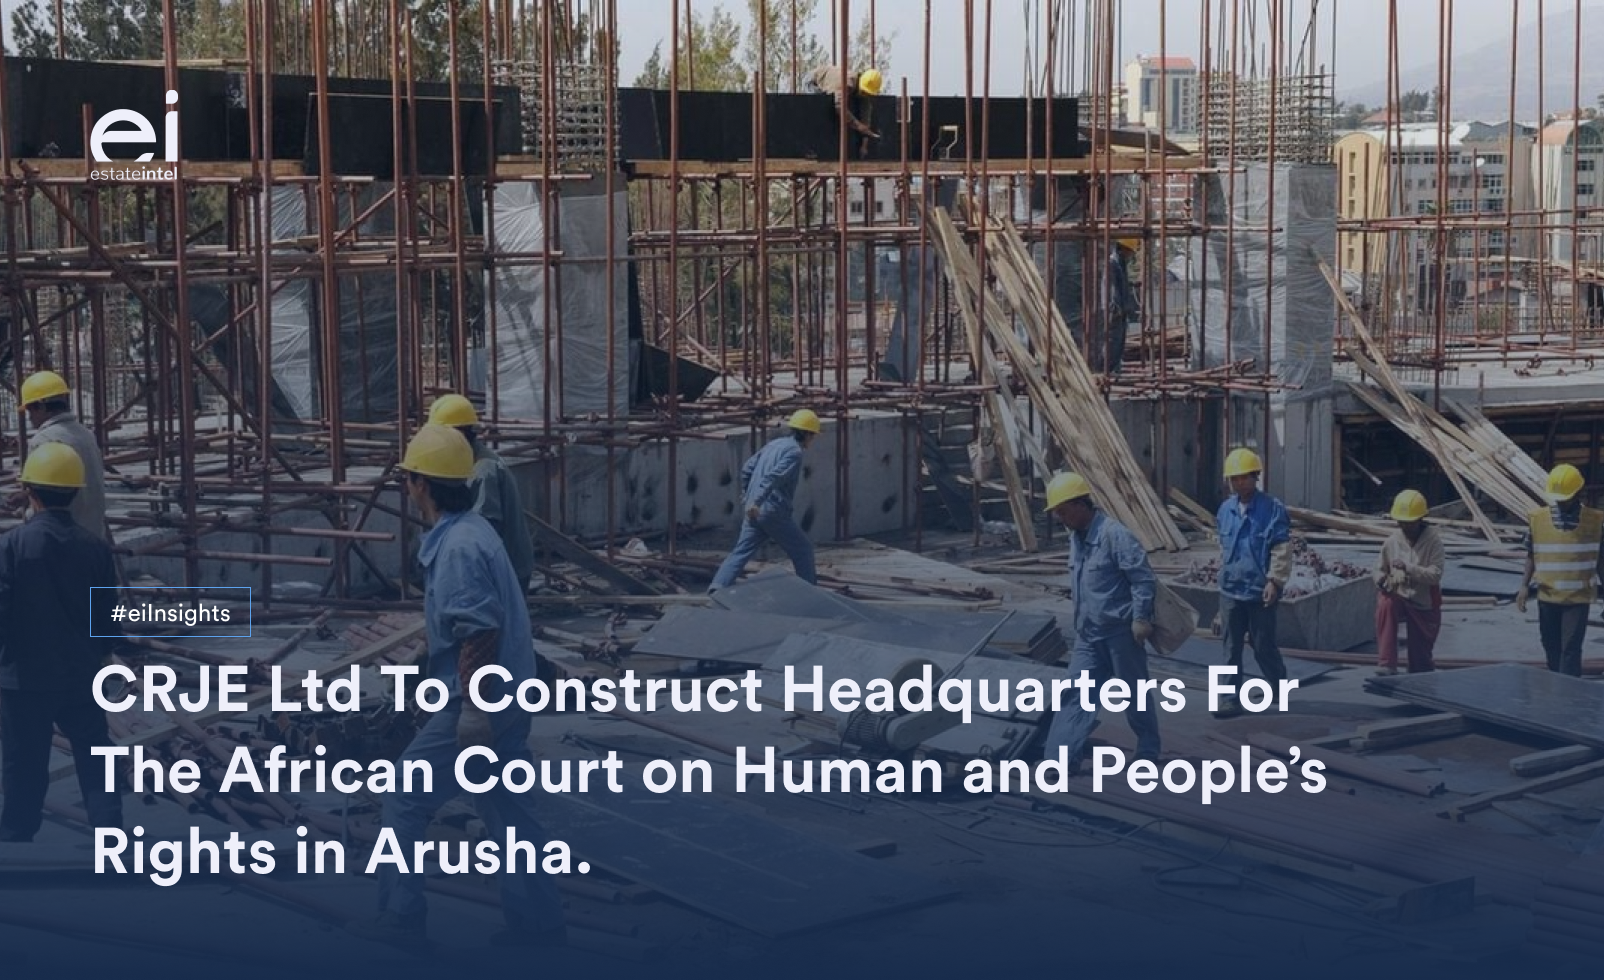 Chinese Firm To Construct The African Court on Human and People’s Rights Headquarters in Tanzania